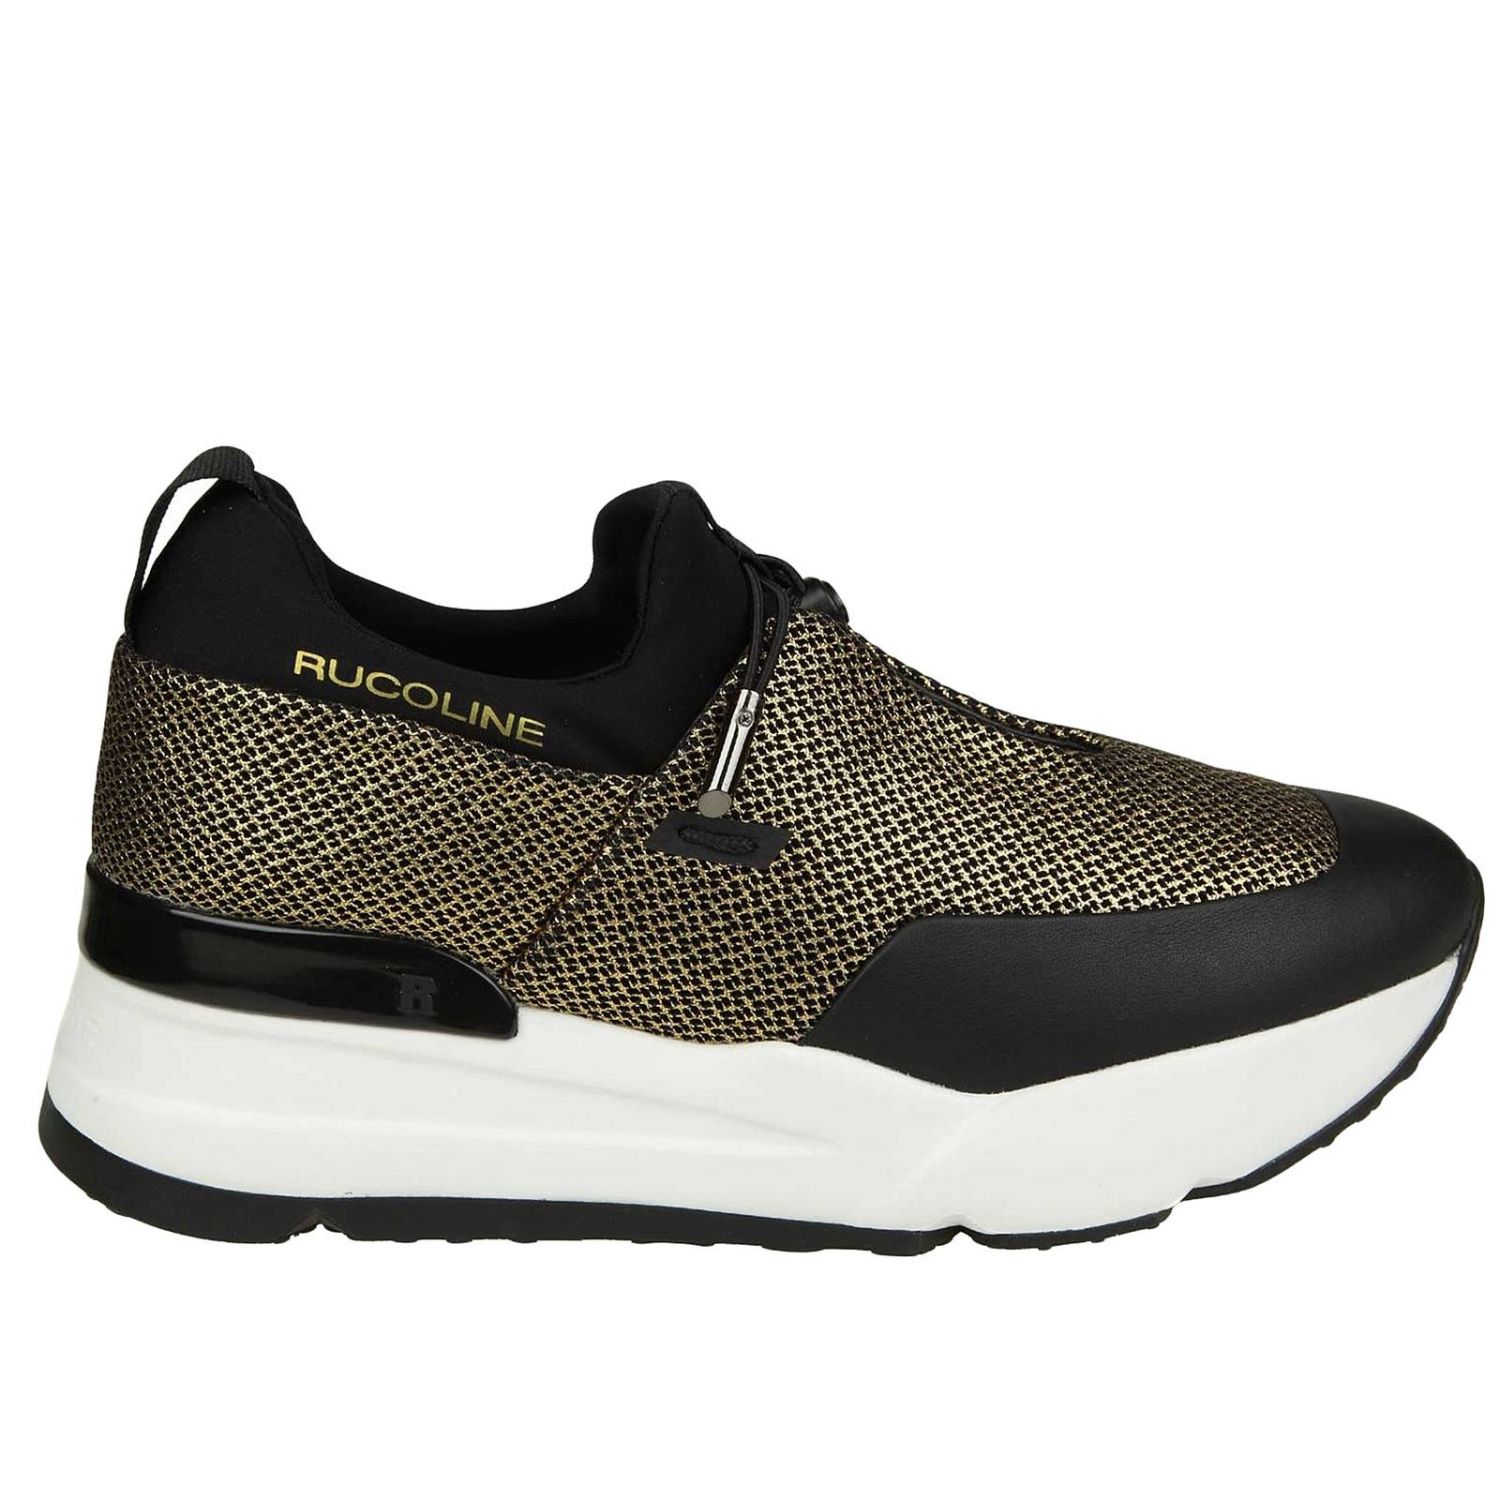 Rucoline Outlet: Sneakers women | Sneakers Rucoline Women Gold ...